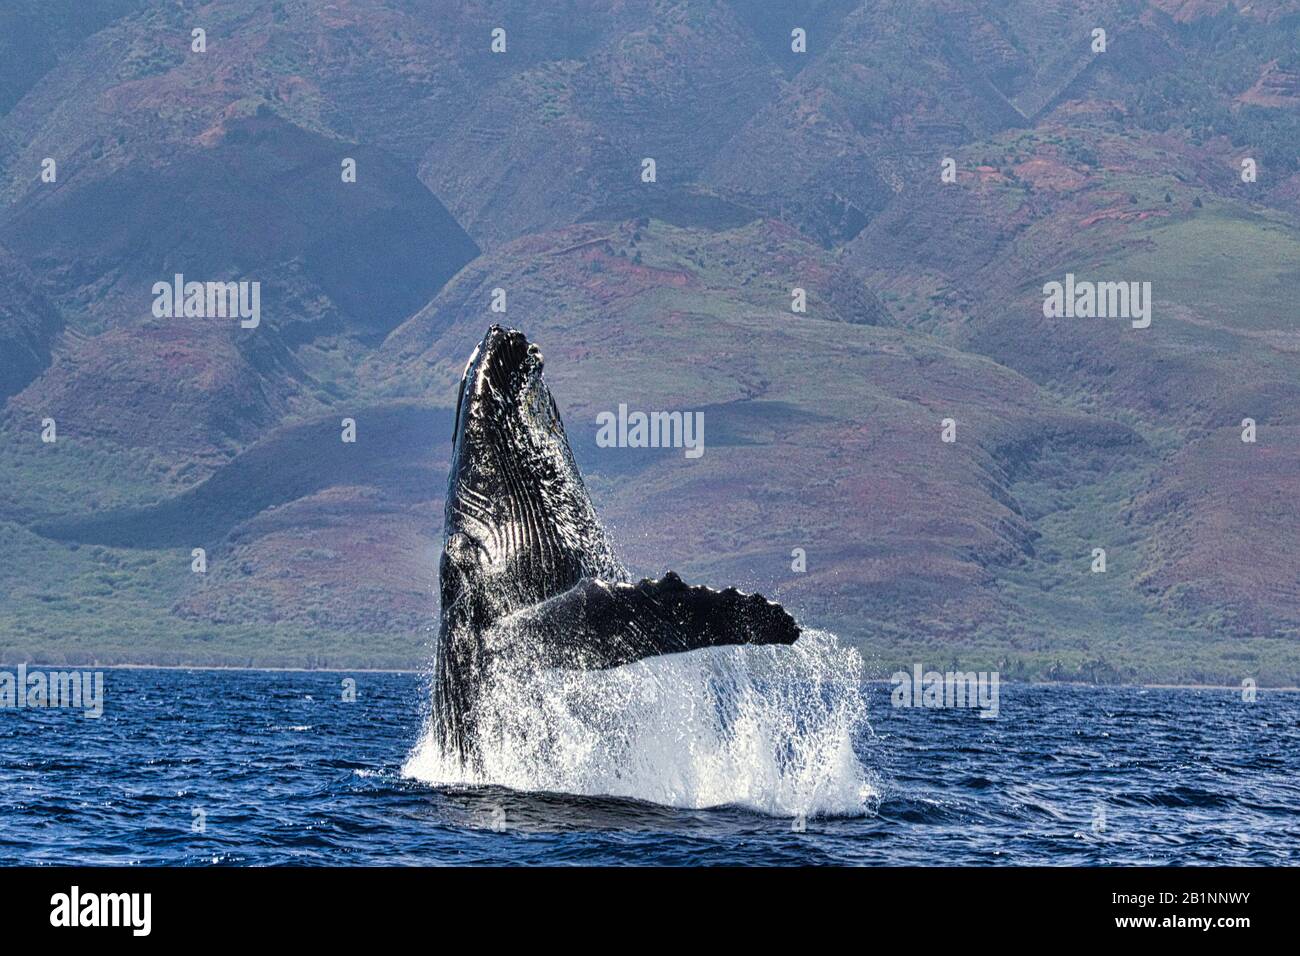 Large powerful humpback whale breaching exhuberantly in the ocean on Maui. Stock Photo